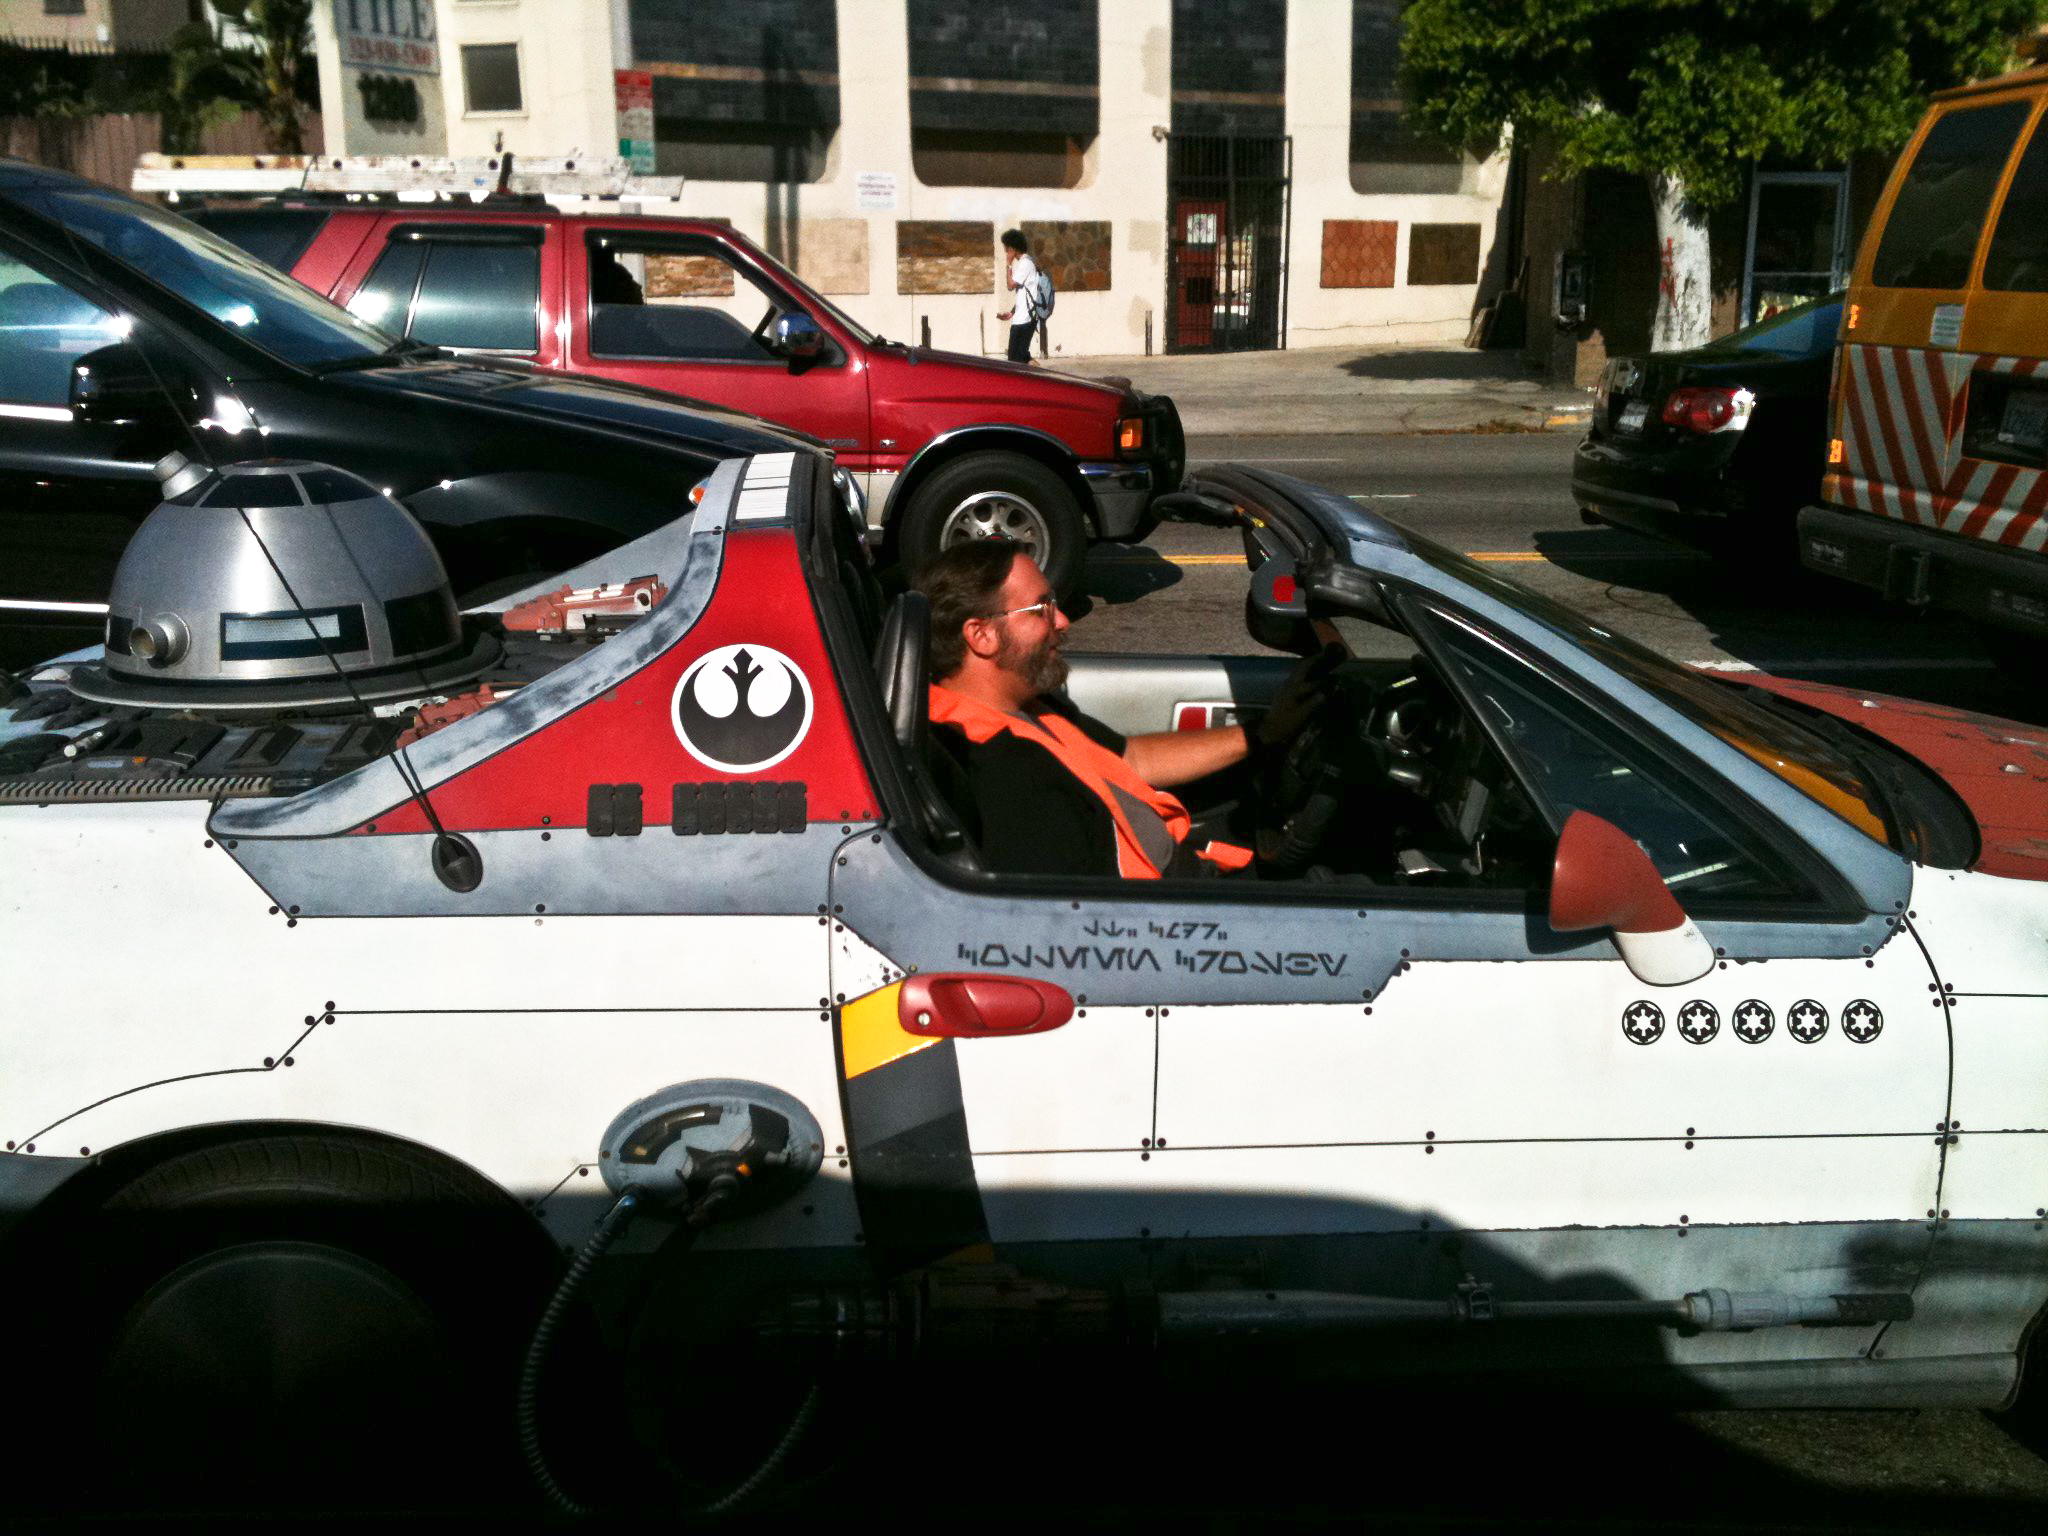 Rush hour shmush hour! Couldn't help busting out into giggles when this fella pulled up next to me on La Brea in Hollywood. Rollin' along Star Wars-style w/R2D2 on board, blasting Journey  singing "Don't Stop Belieivin" at the top of his lungs! Yeah, buddy! 